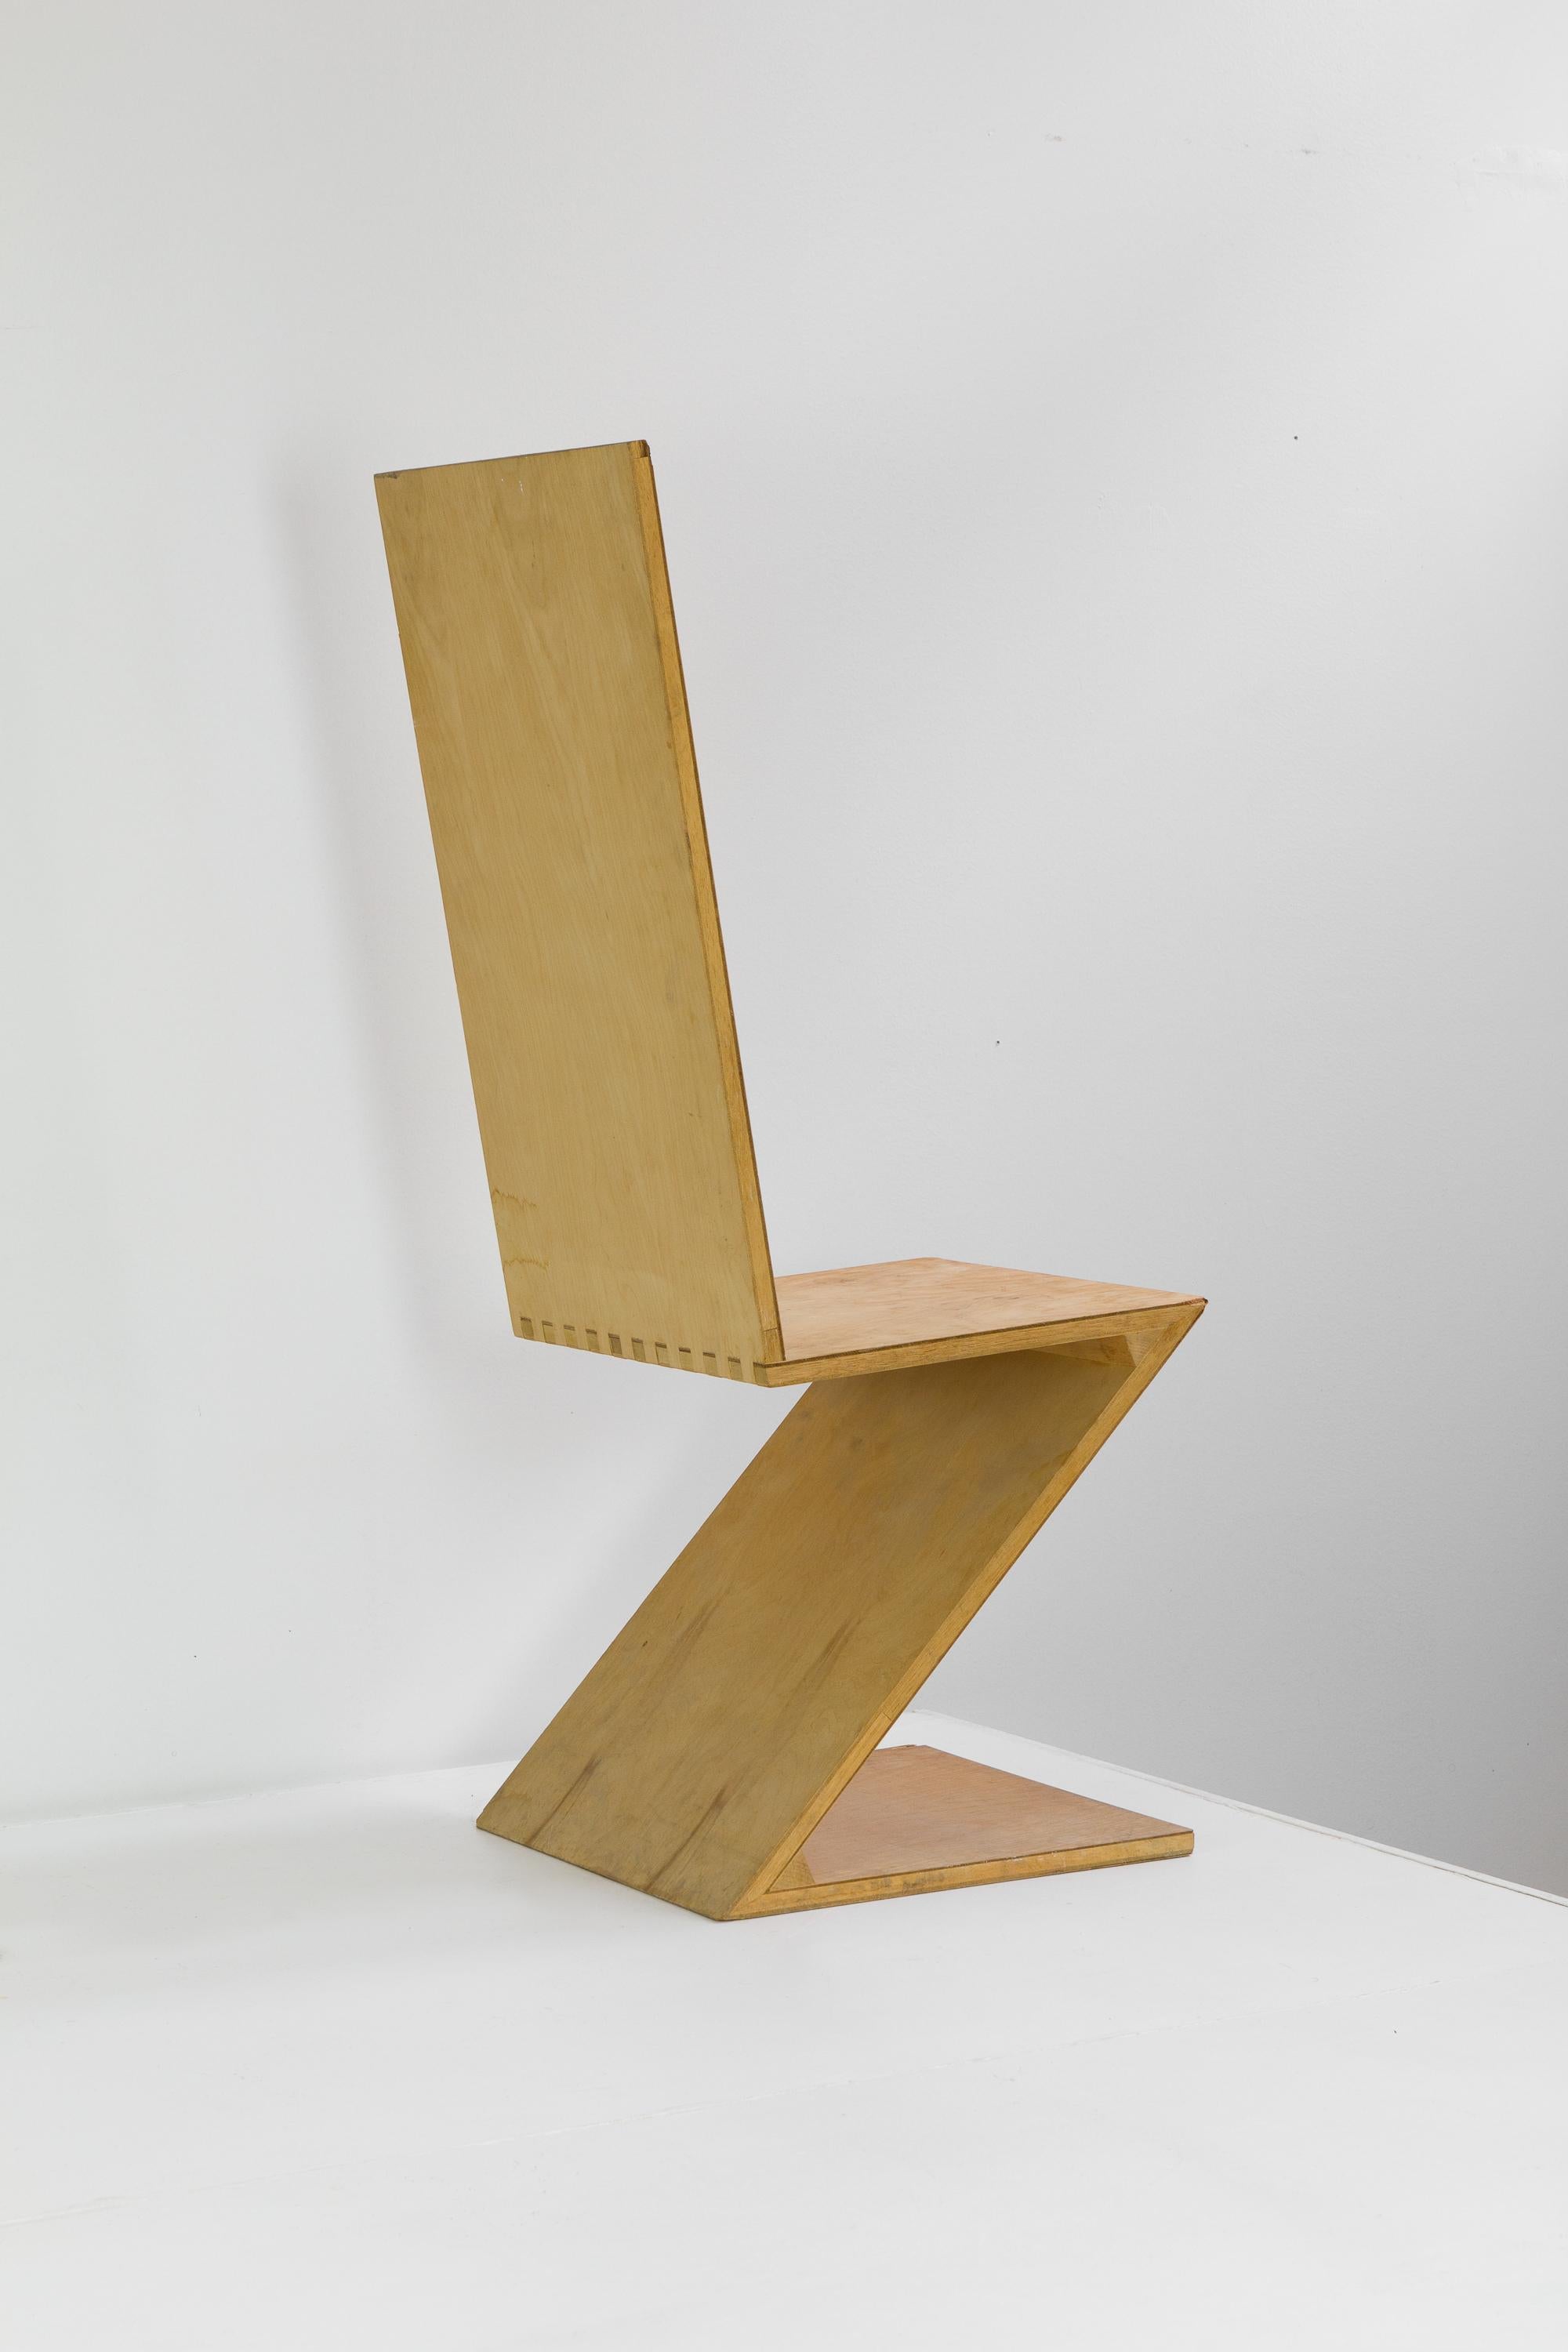 Vernacular handmade tall back Zig-Zag chairs after Gerrit Rietveld. Unfinished plywood veneer over block construction. Finger jointed, wedged and very strong. Two available.